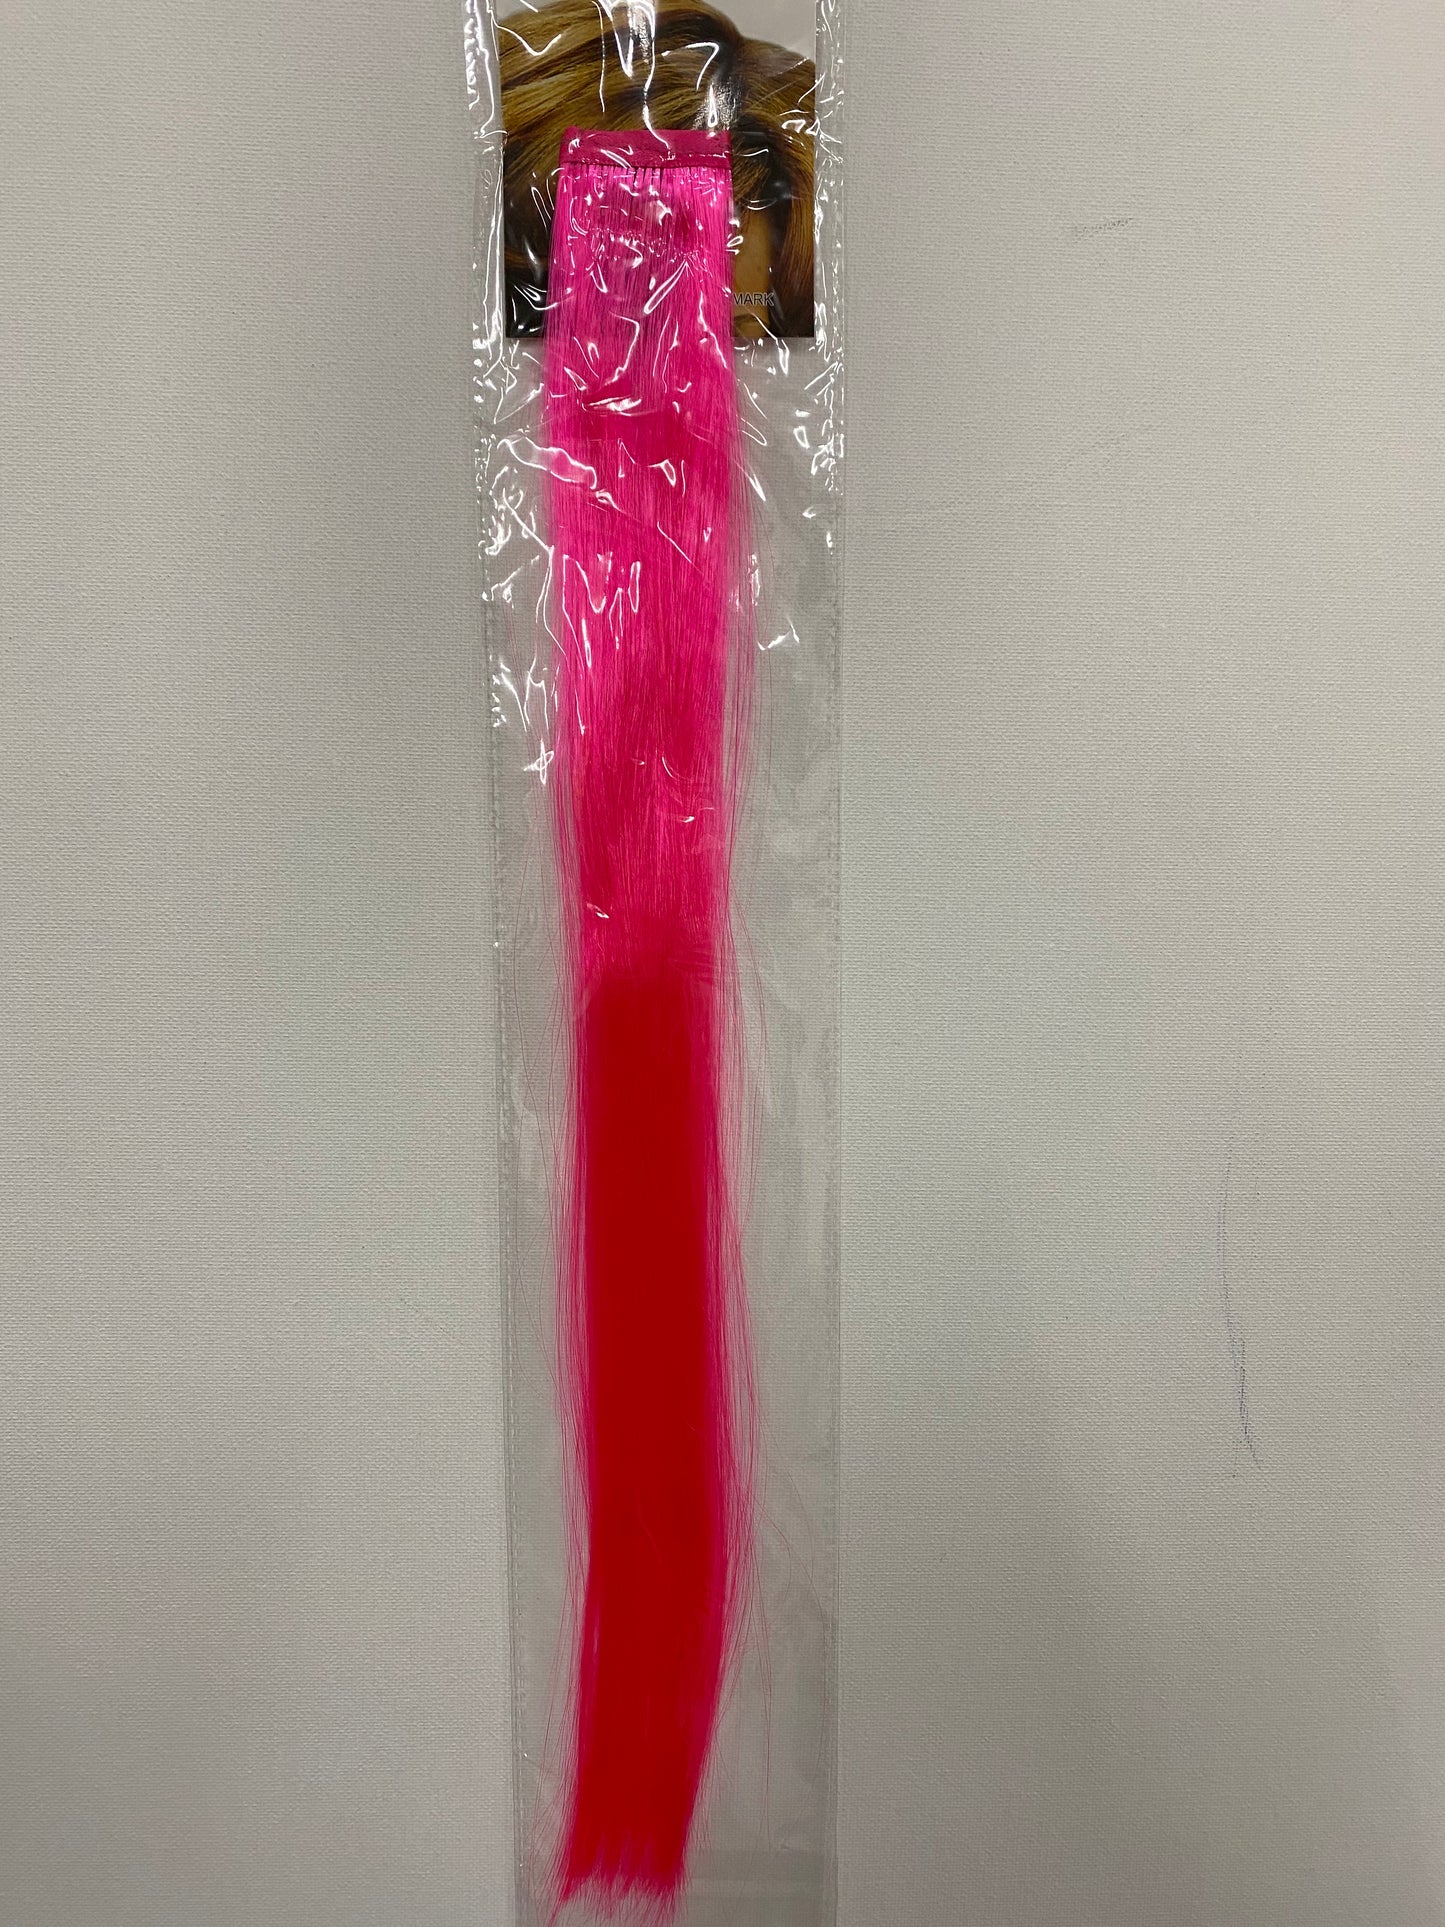 Hair Extension-Hot Pink . UE0100G-HP